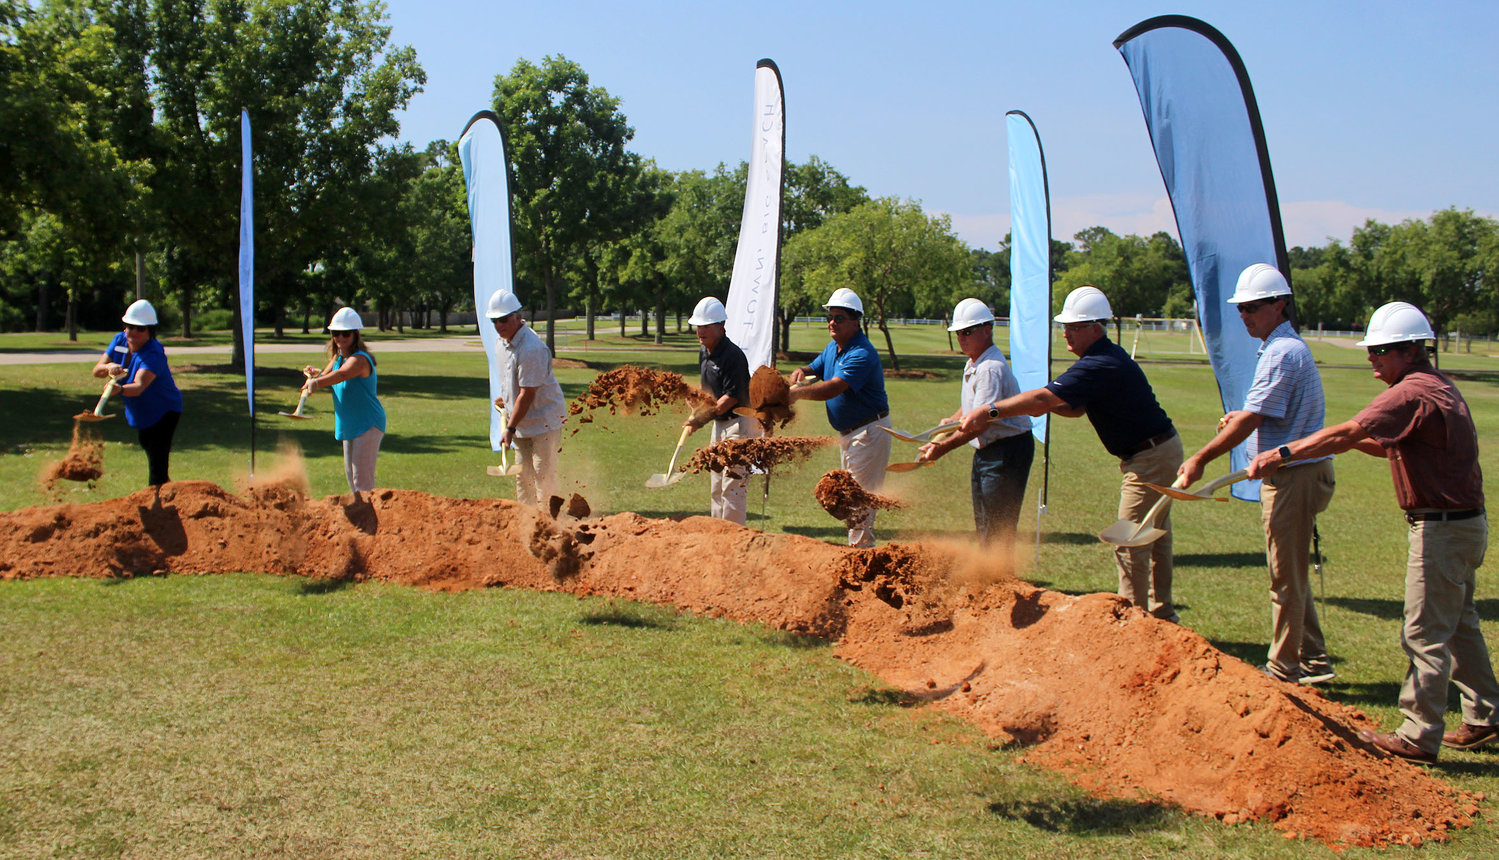 The City of Gulf Shores and Gulf Shores | Orange Beach Sports & Events hosted a groundbreaking ceremony Wednesday, June 22, to kick off construction on 12 pickleball courts next to Mickey Miller Blackwell Stadium at the Gulf Shores Sportsplex. Pictured from the left are Michelle Russ, Beth Gendler, Glen Kaiser, Robert Craft, Phillip Harris, Gary Sinak, Grant Brown, Seawell McKee and Jeff Nichols.